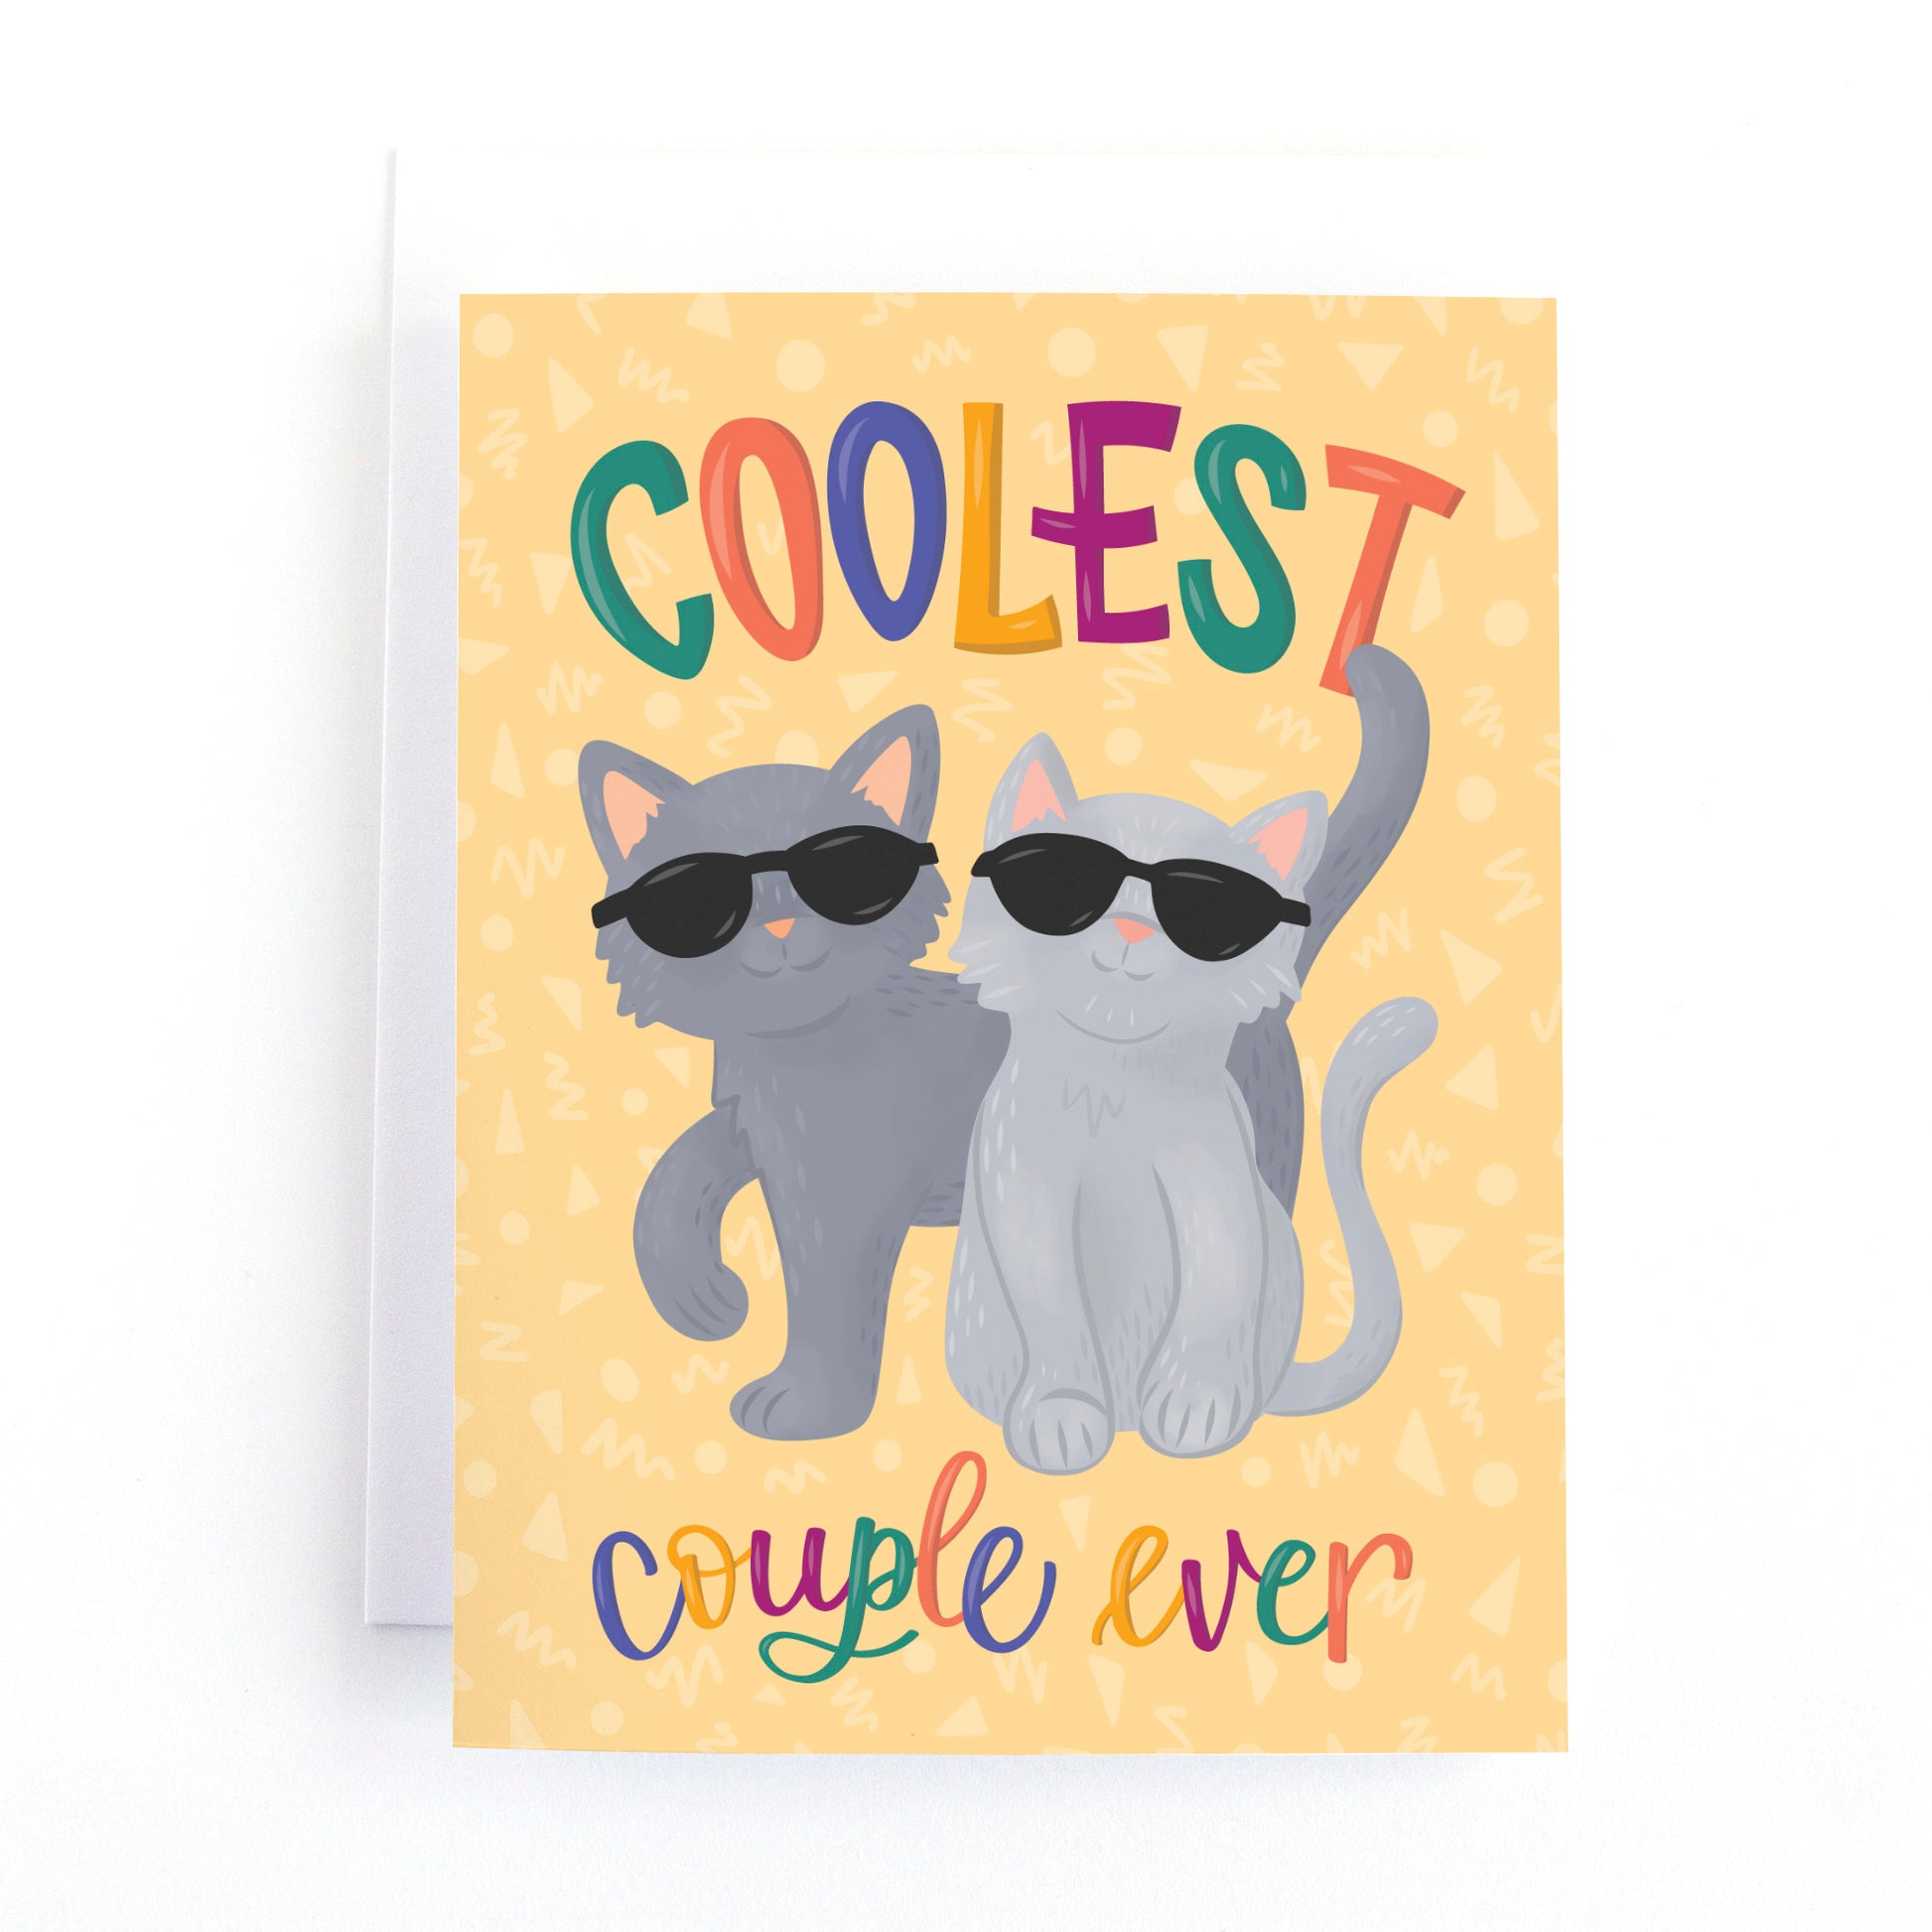 Anniversary card with two cats wearing sunglasses and the text, coolest couple ever.